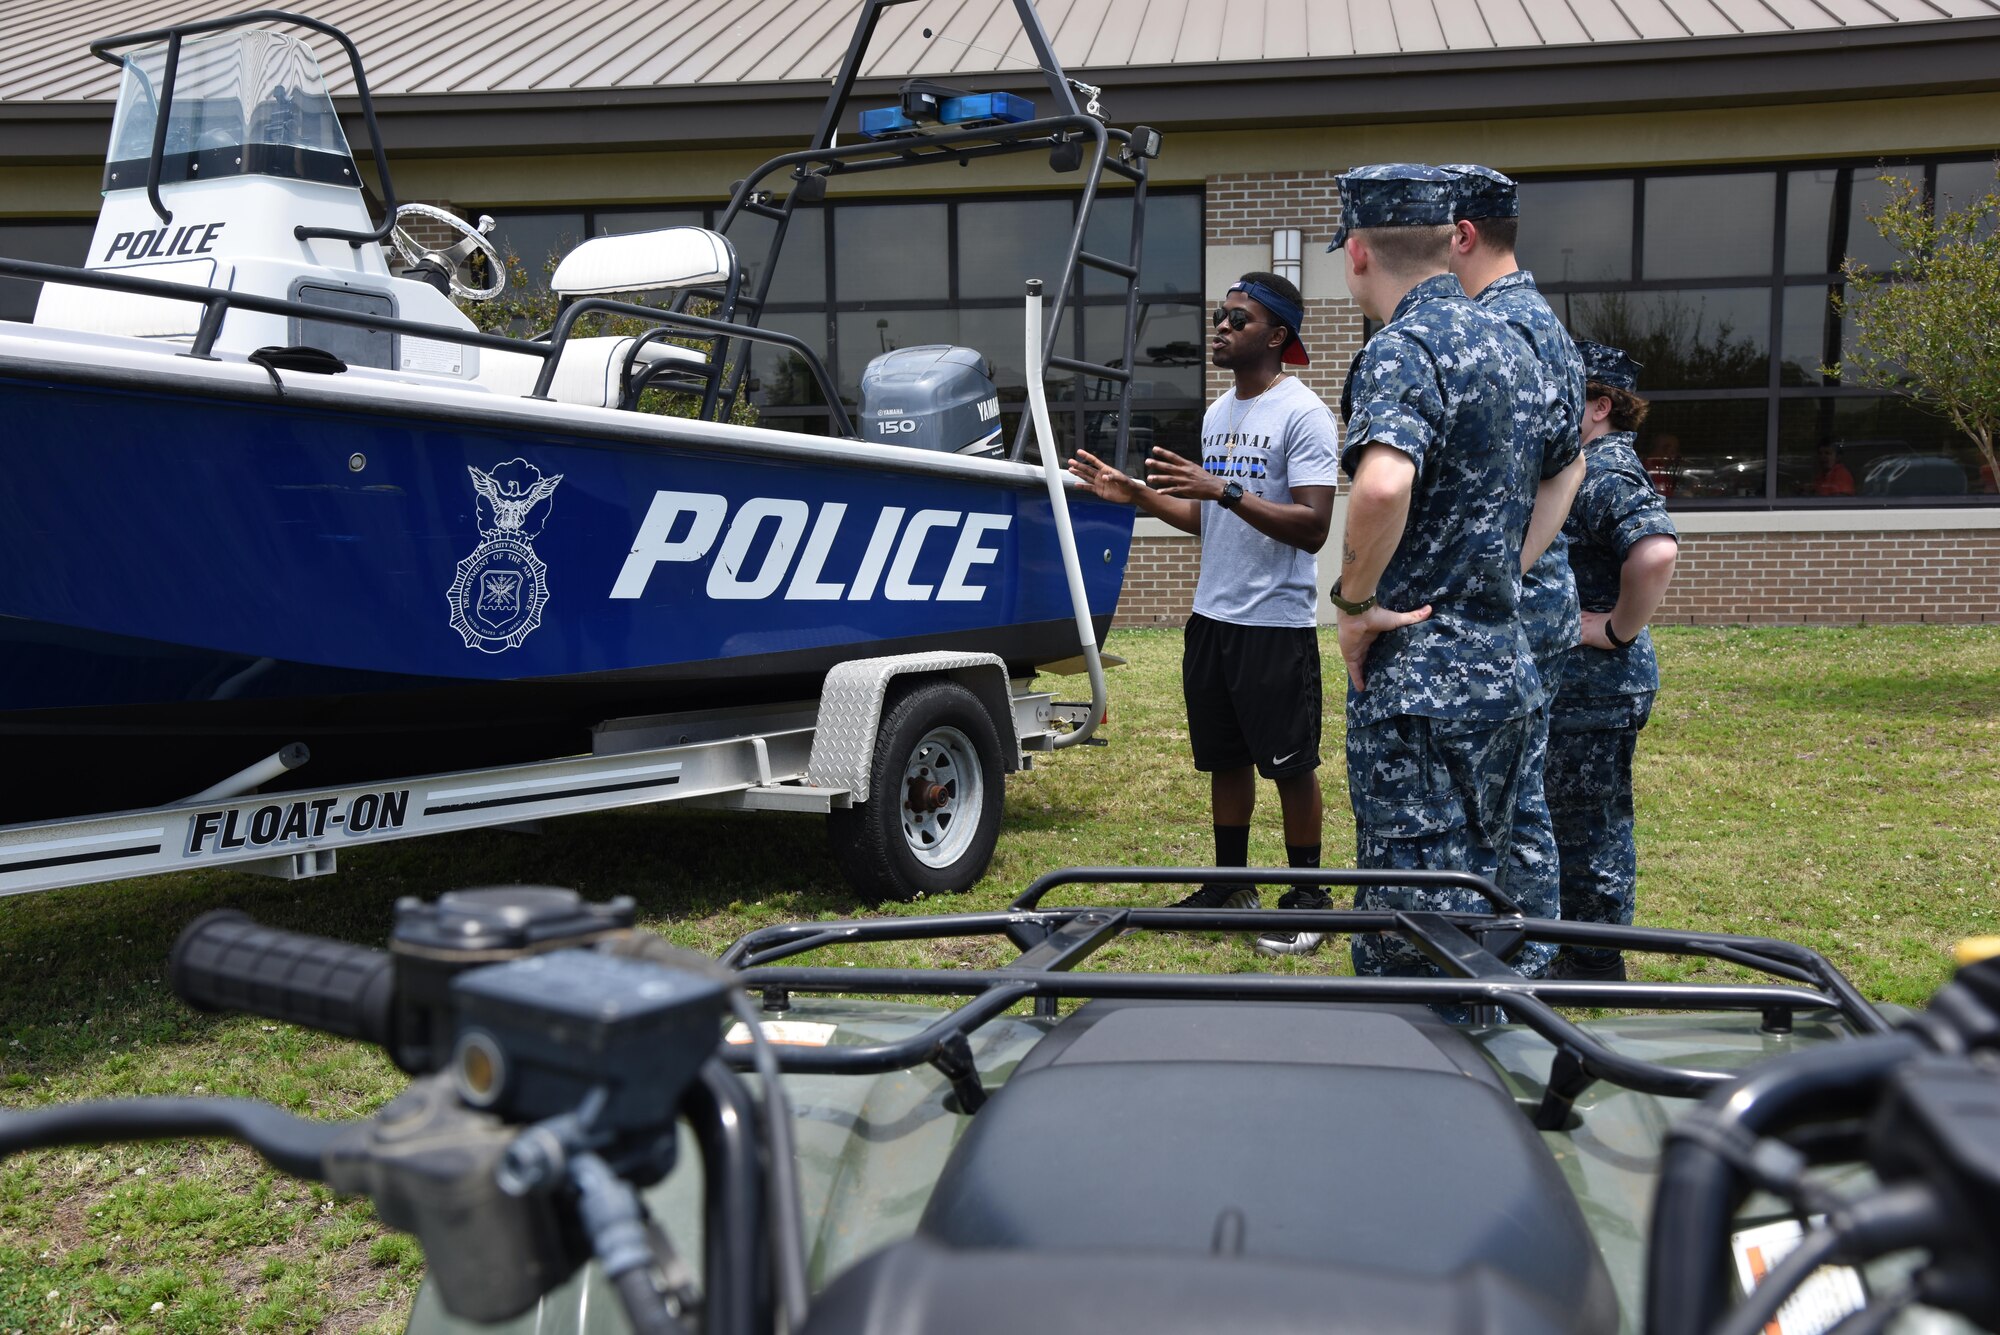 Airman 1st Class Lionel Jones, 81st Security Forces Squadron entry controller, briefs members of the Center For Naval Aviation Technical Training Unit Keesler on the 81st SFS boating mission during Police Week fun day at the Base Exchange May 18, 2017, on Keesler Air Force Base, Miss. The event was held during National Police Week, which recognizes the service of law enforcement men and women who put their lives at risk every day. (U.S. Air Force photo by Kemberly Groue)